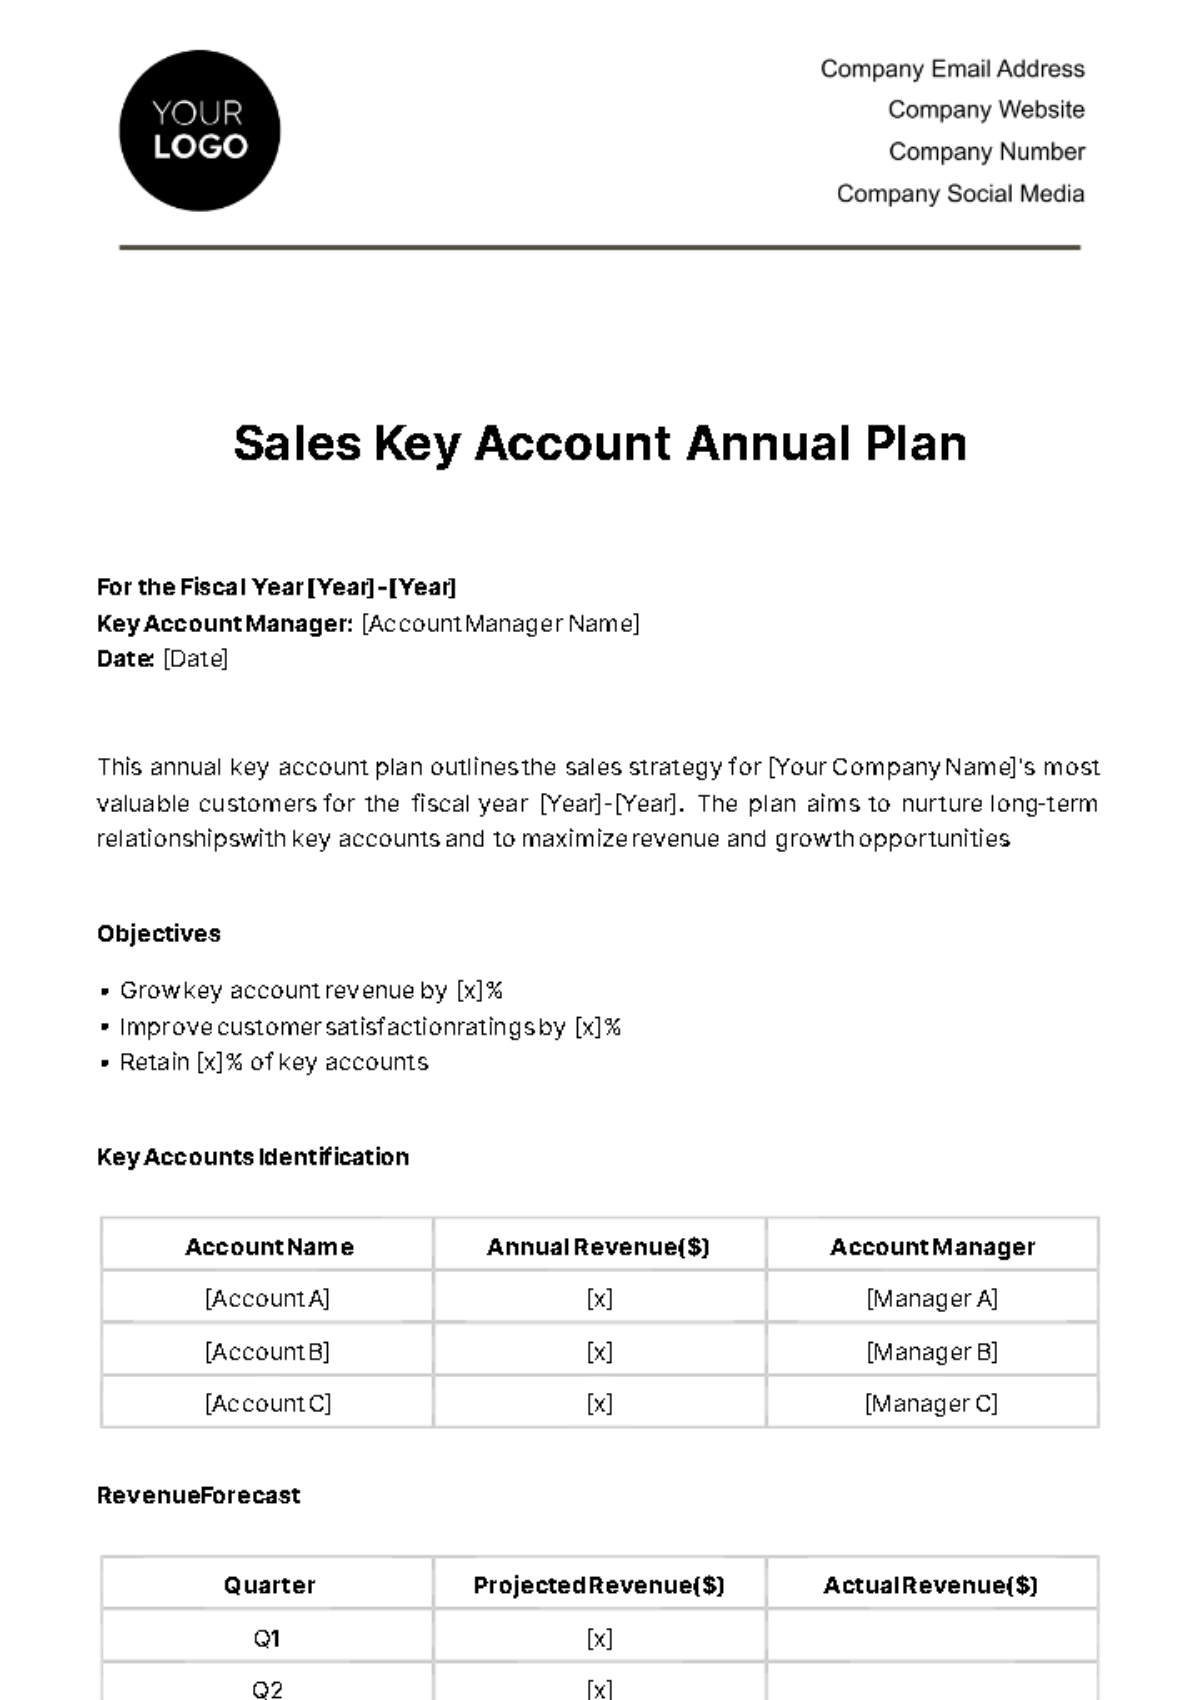 Sales Key Account Annual Plan Template